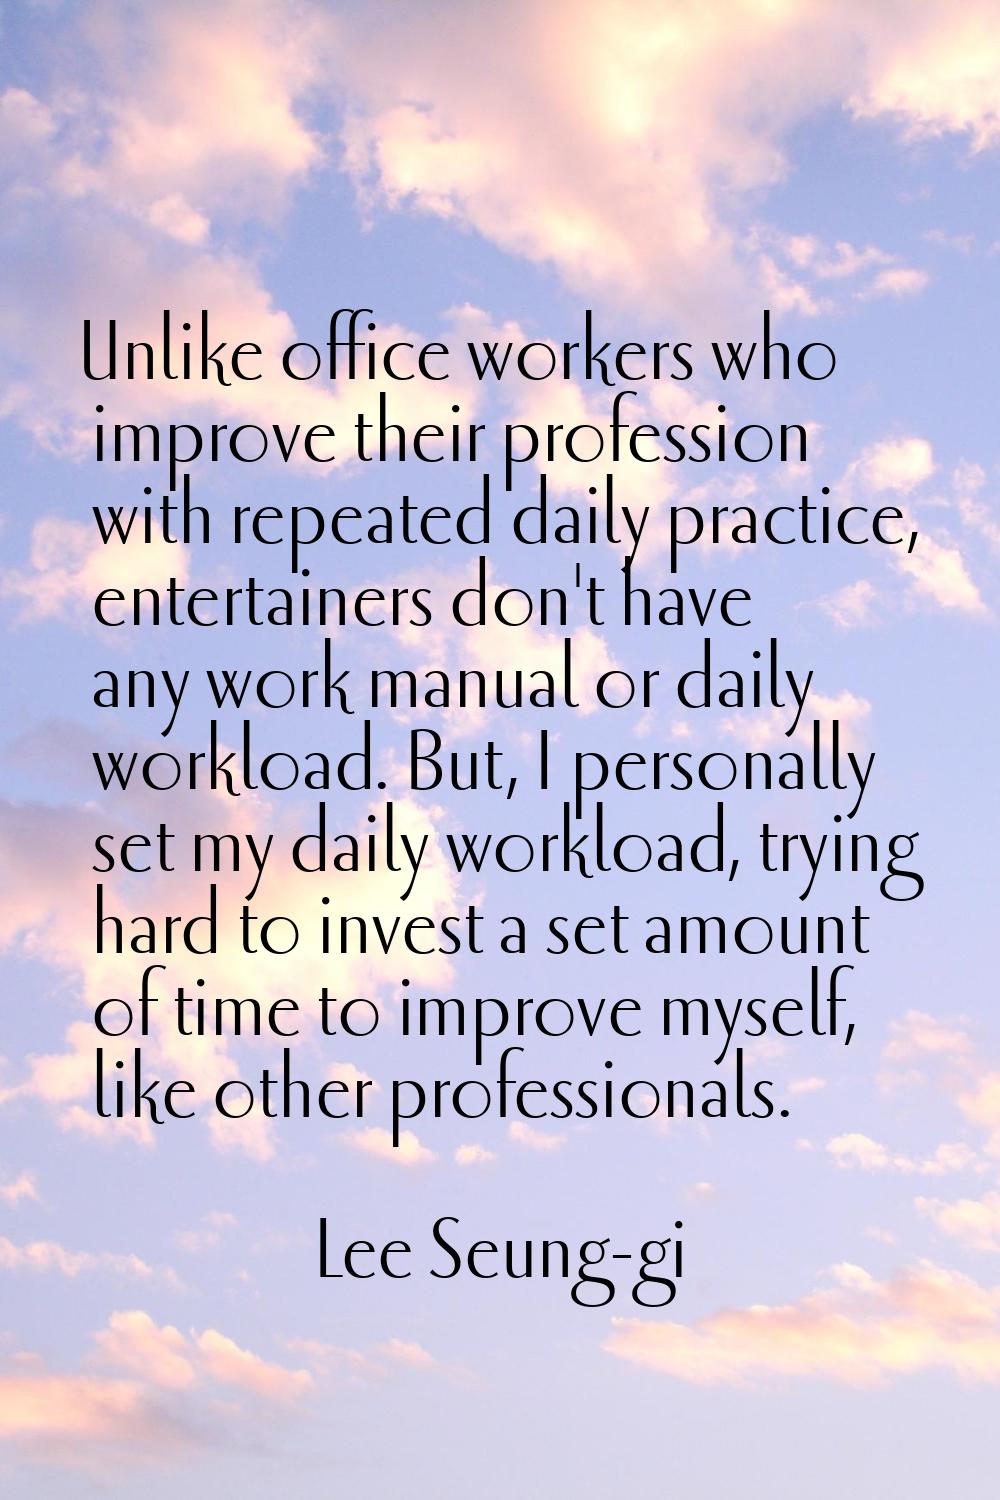 Unlike office workers who improve their profession with repeated daily practice, entertainers don't